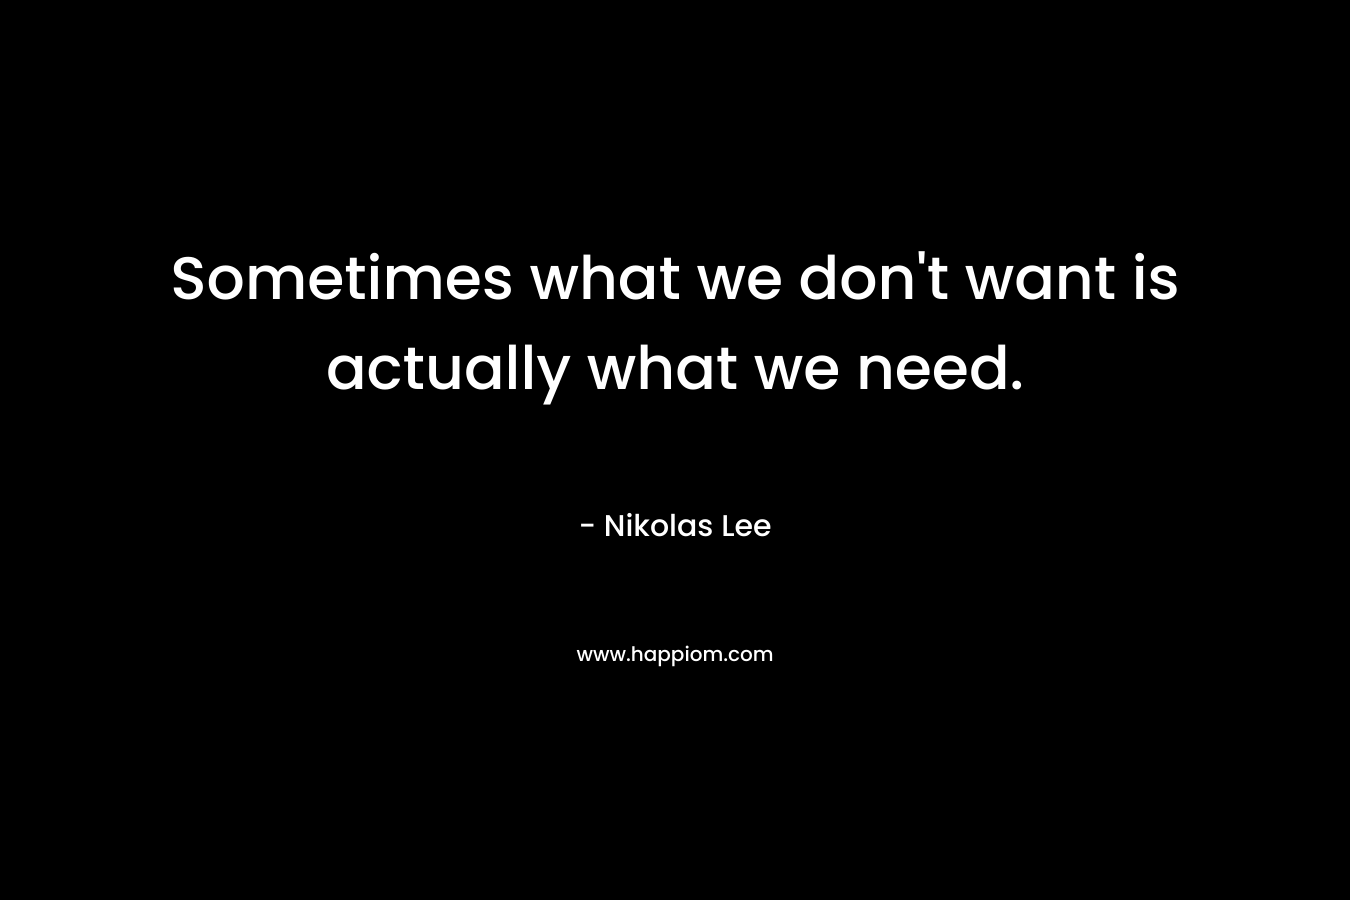 Sometimes what we don't want is actually what we need.